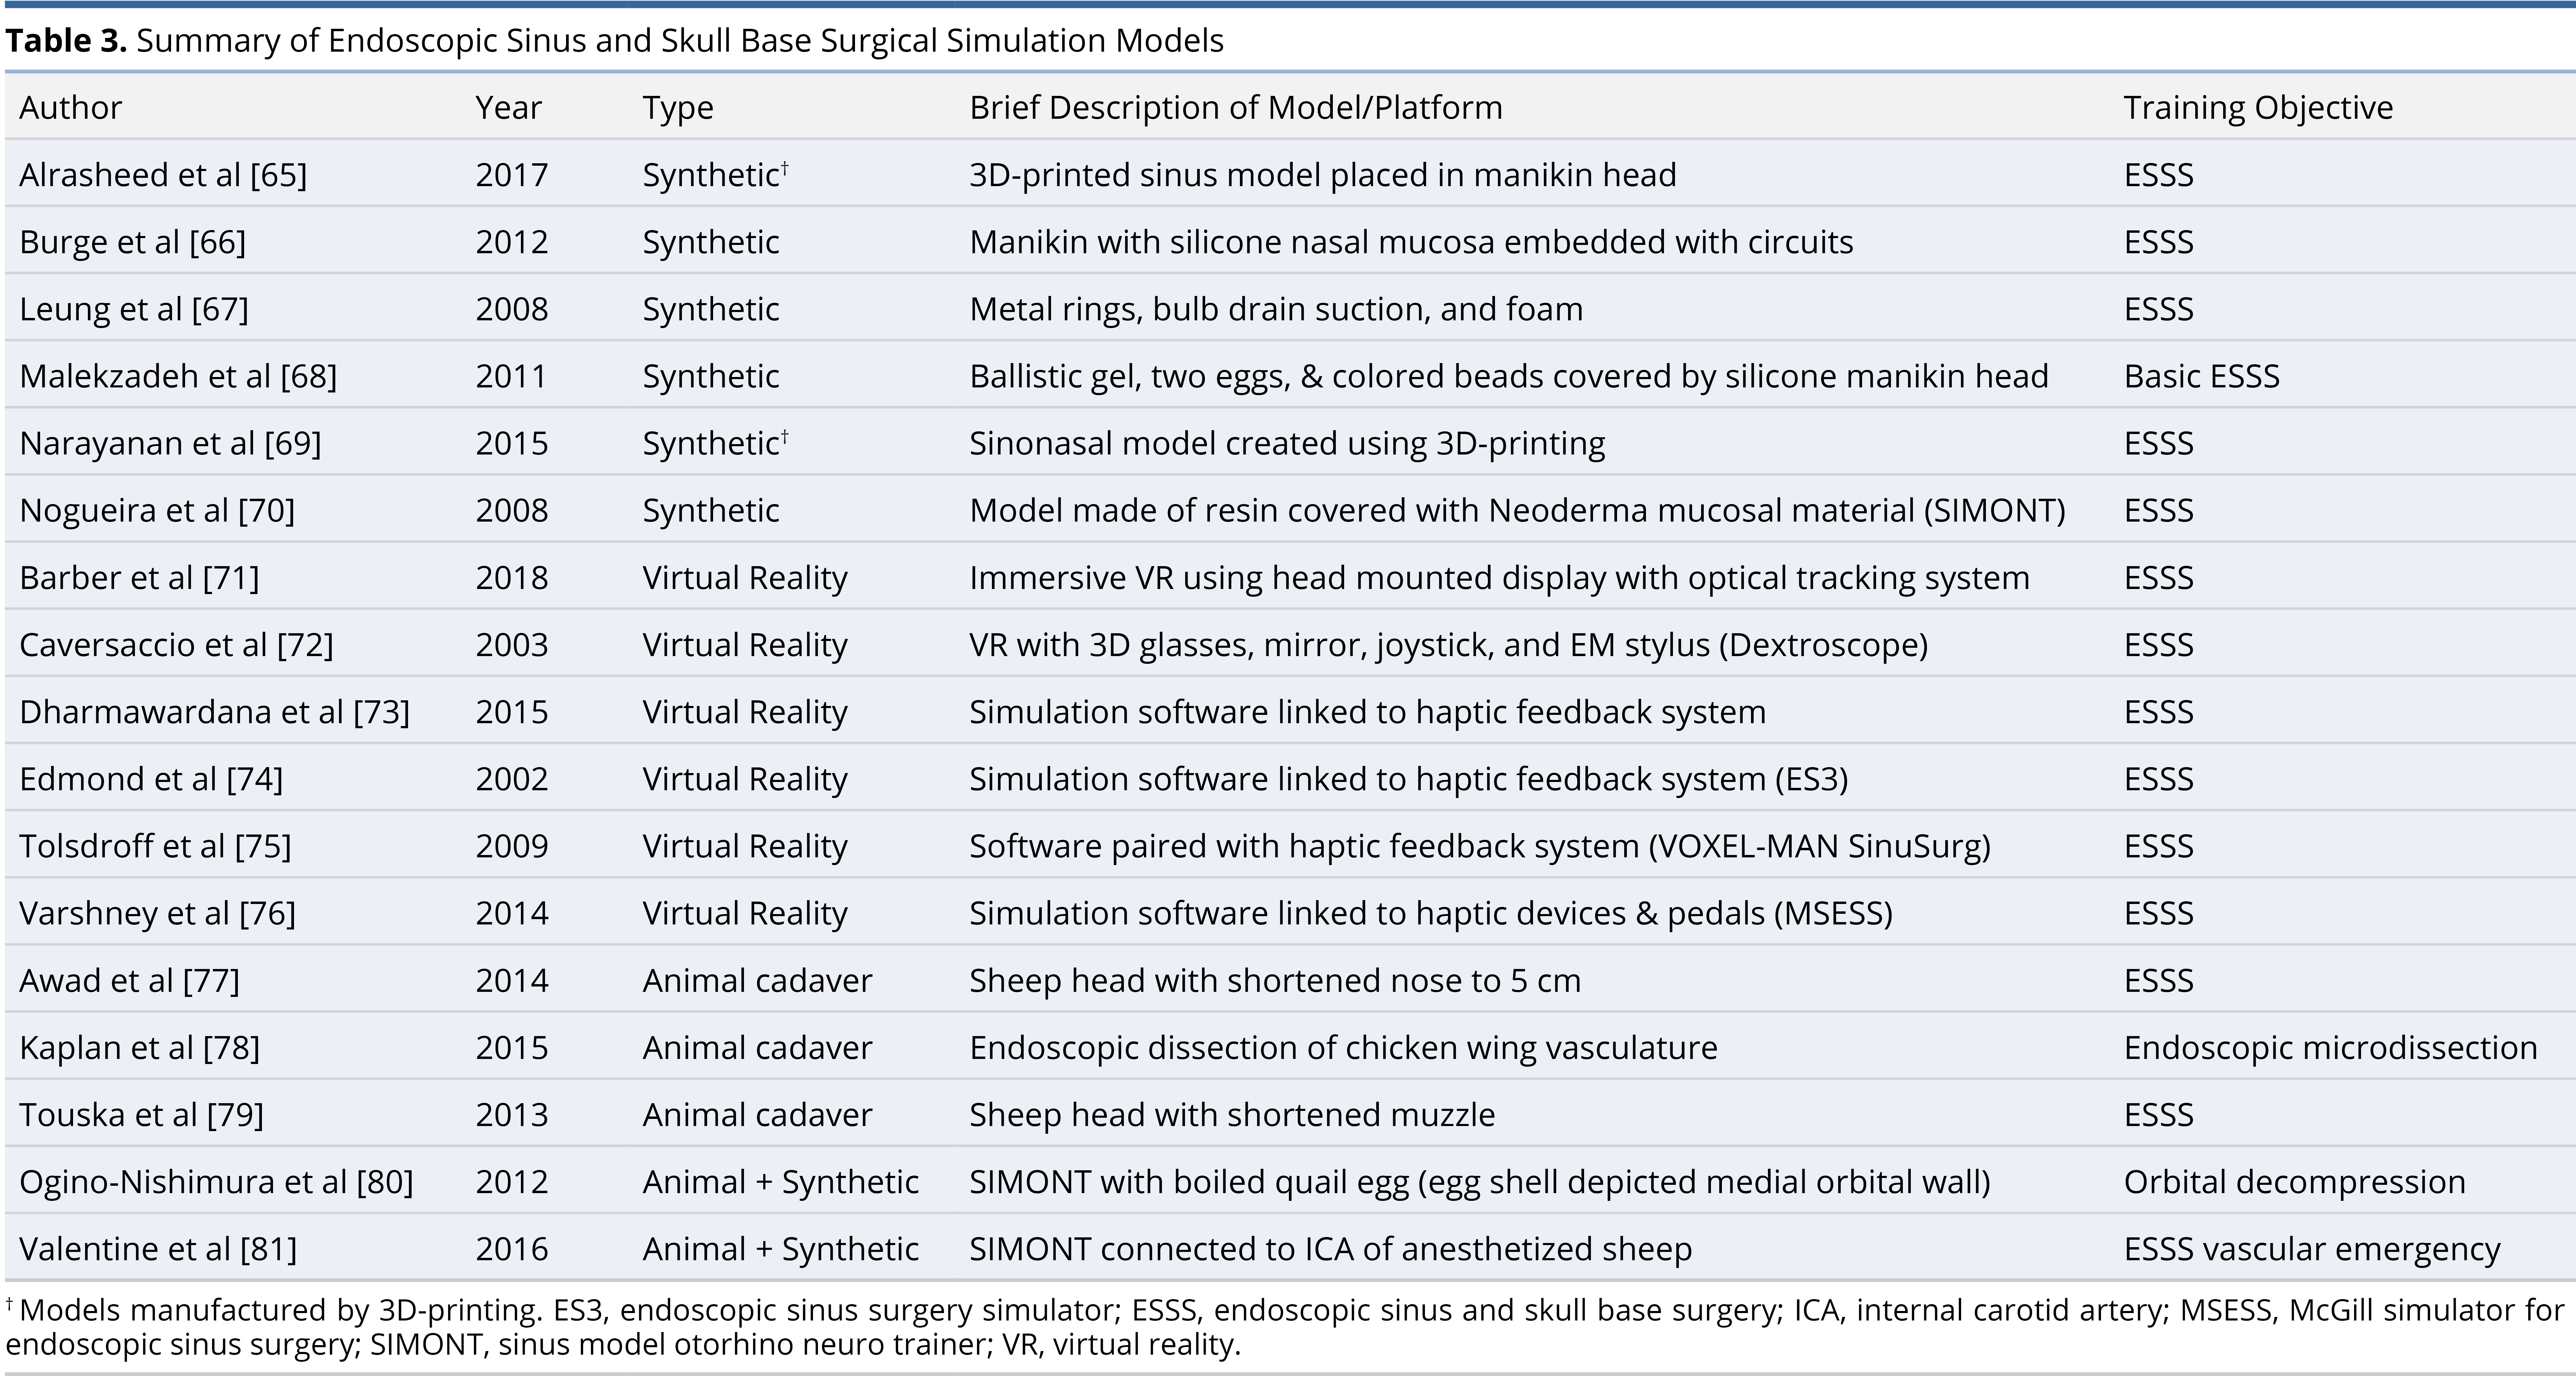 Table 3.jpgSummary of Endoscopic Sinus and Skull Base Surgical Simulation Models